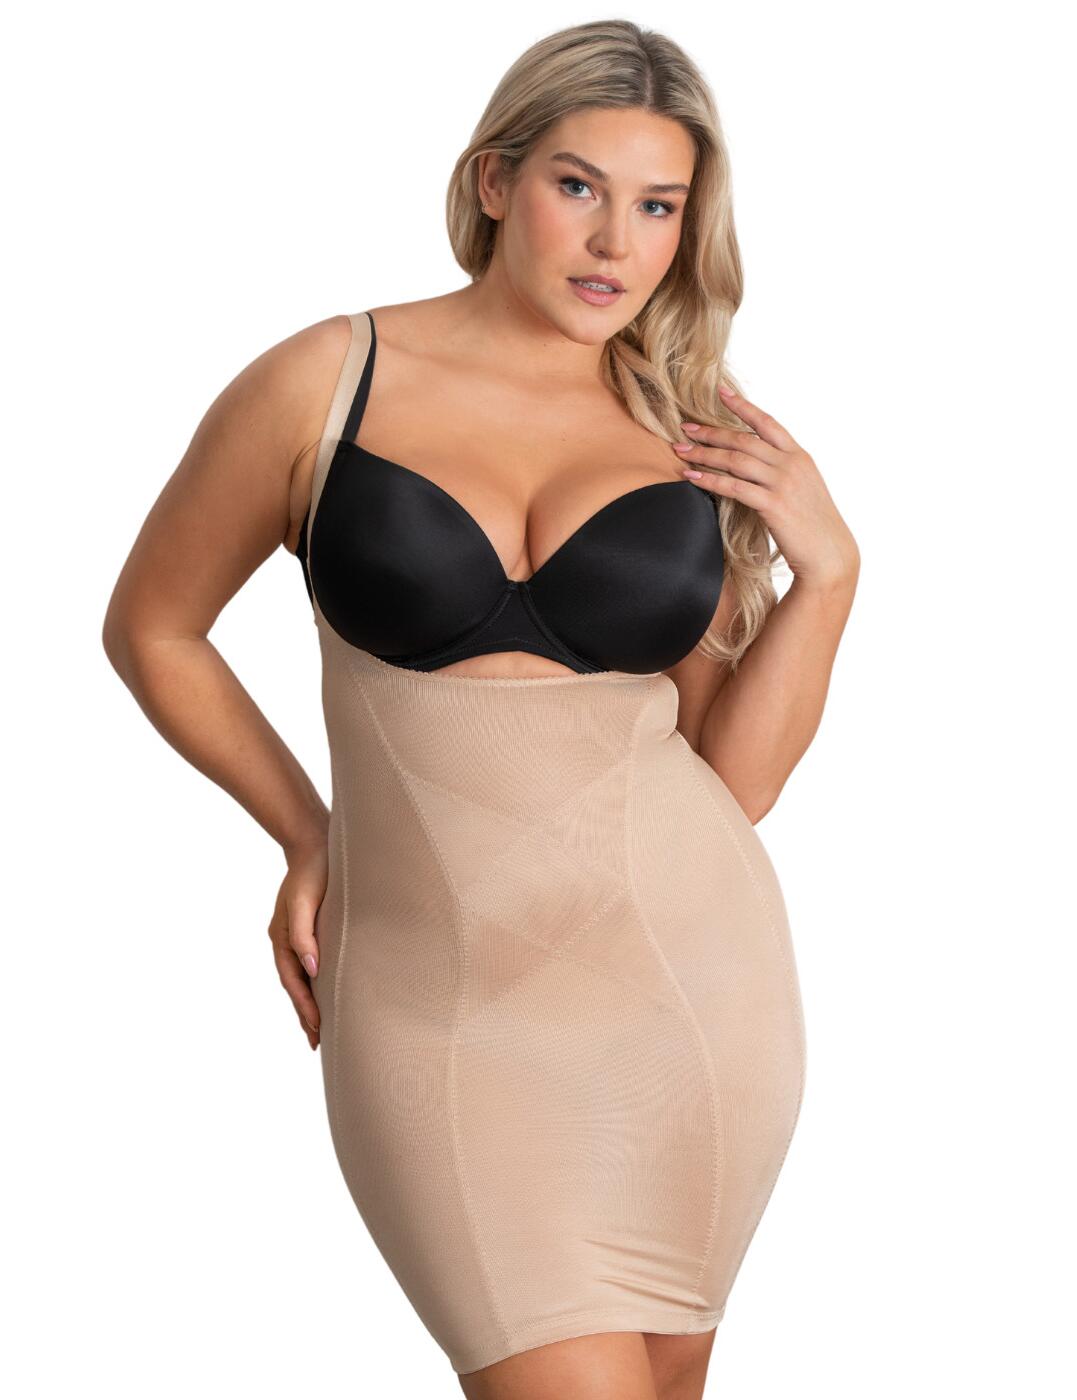 16602 Pour Moi Hourglass Firm Control Wear Your Own Bra Slip - 16602 Caramel